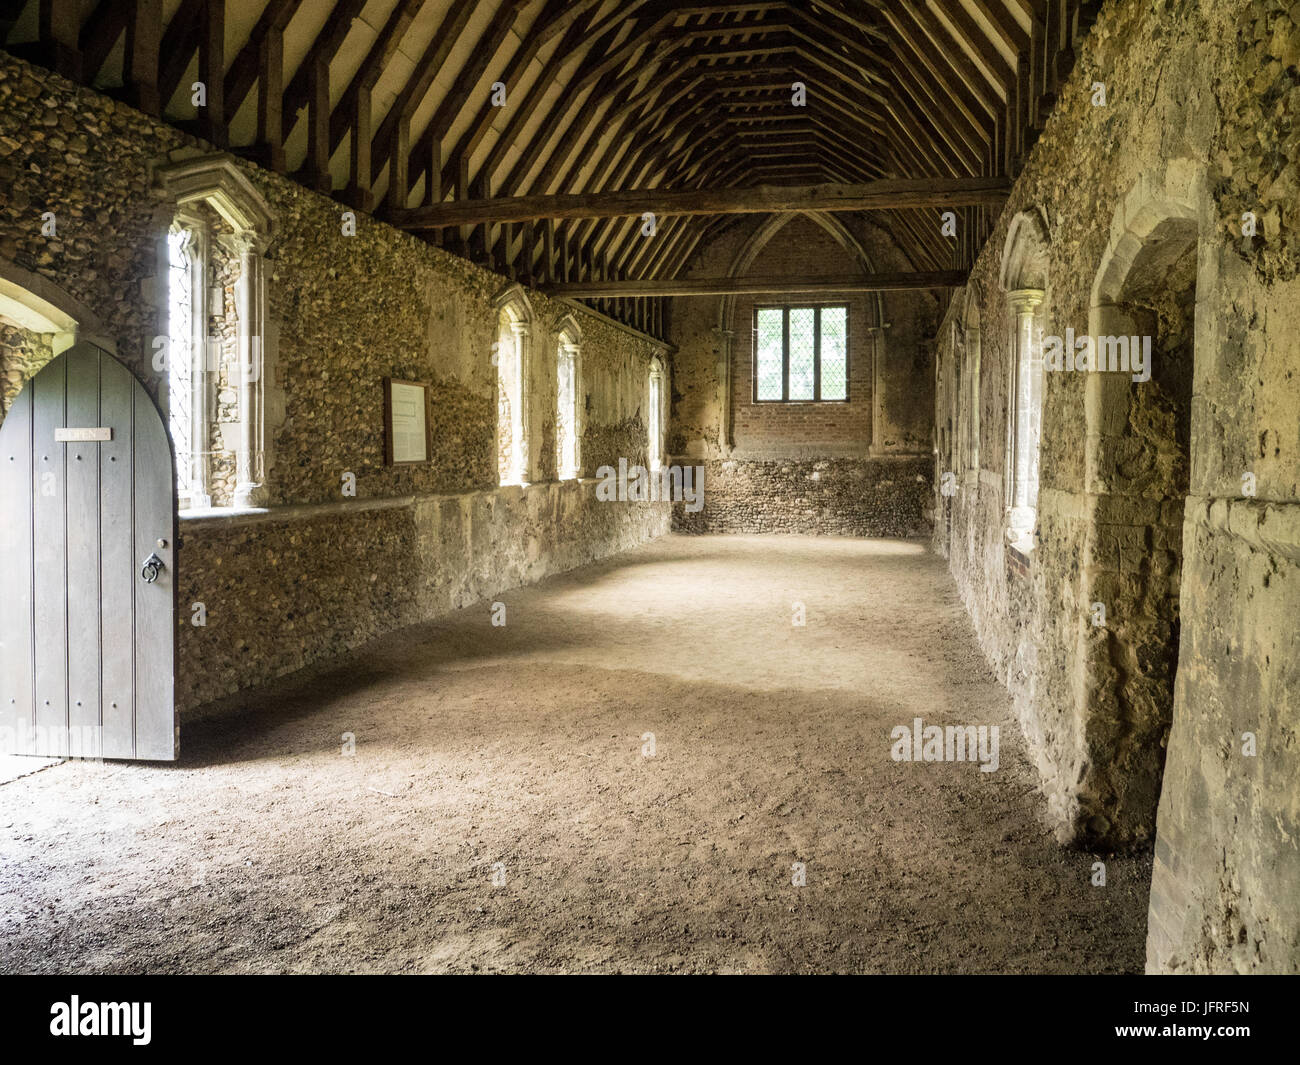 Duxford Chapel in Whittlesford, Cambridgeshire. This is a c14 Chantry Chapel that may once have been used as a leper hospital. English Heritage ru Stock Photo